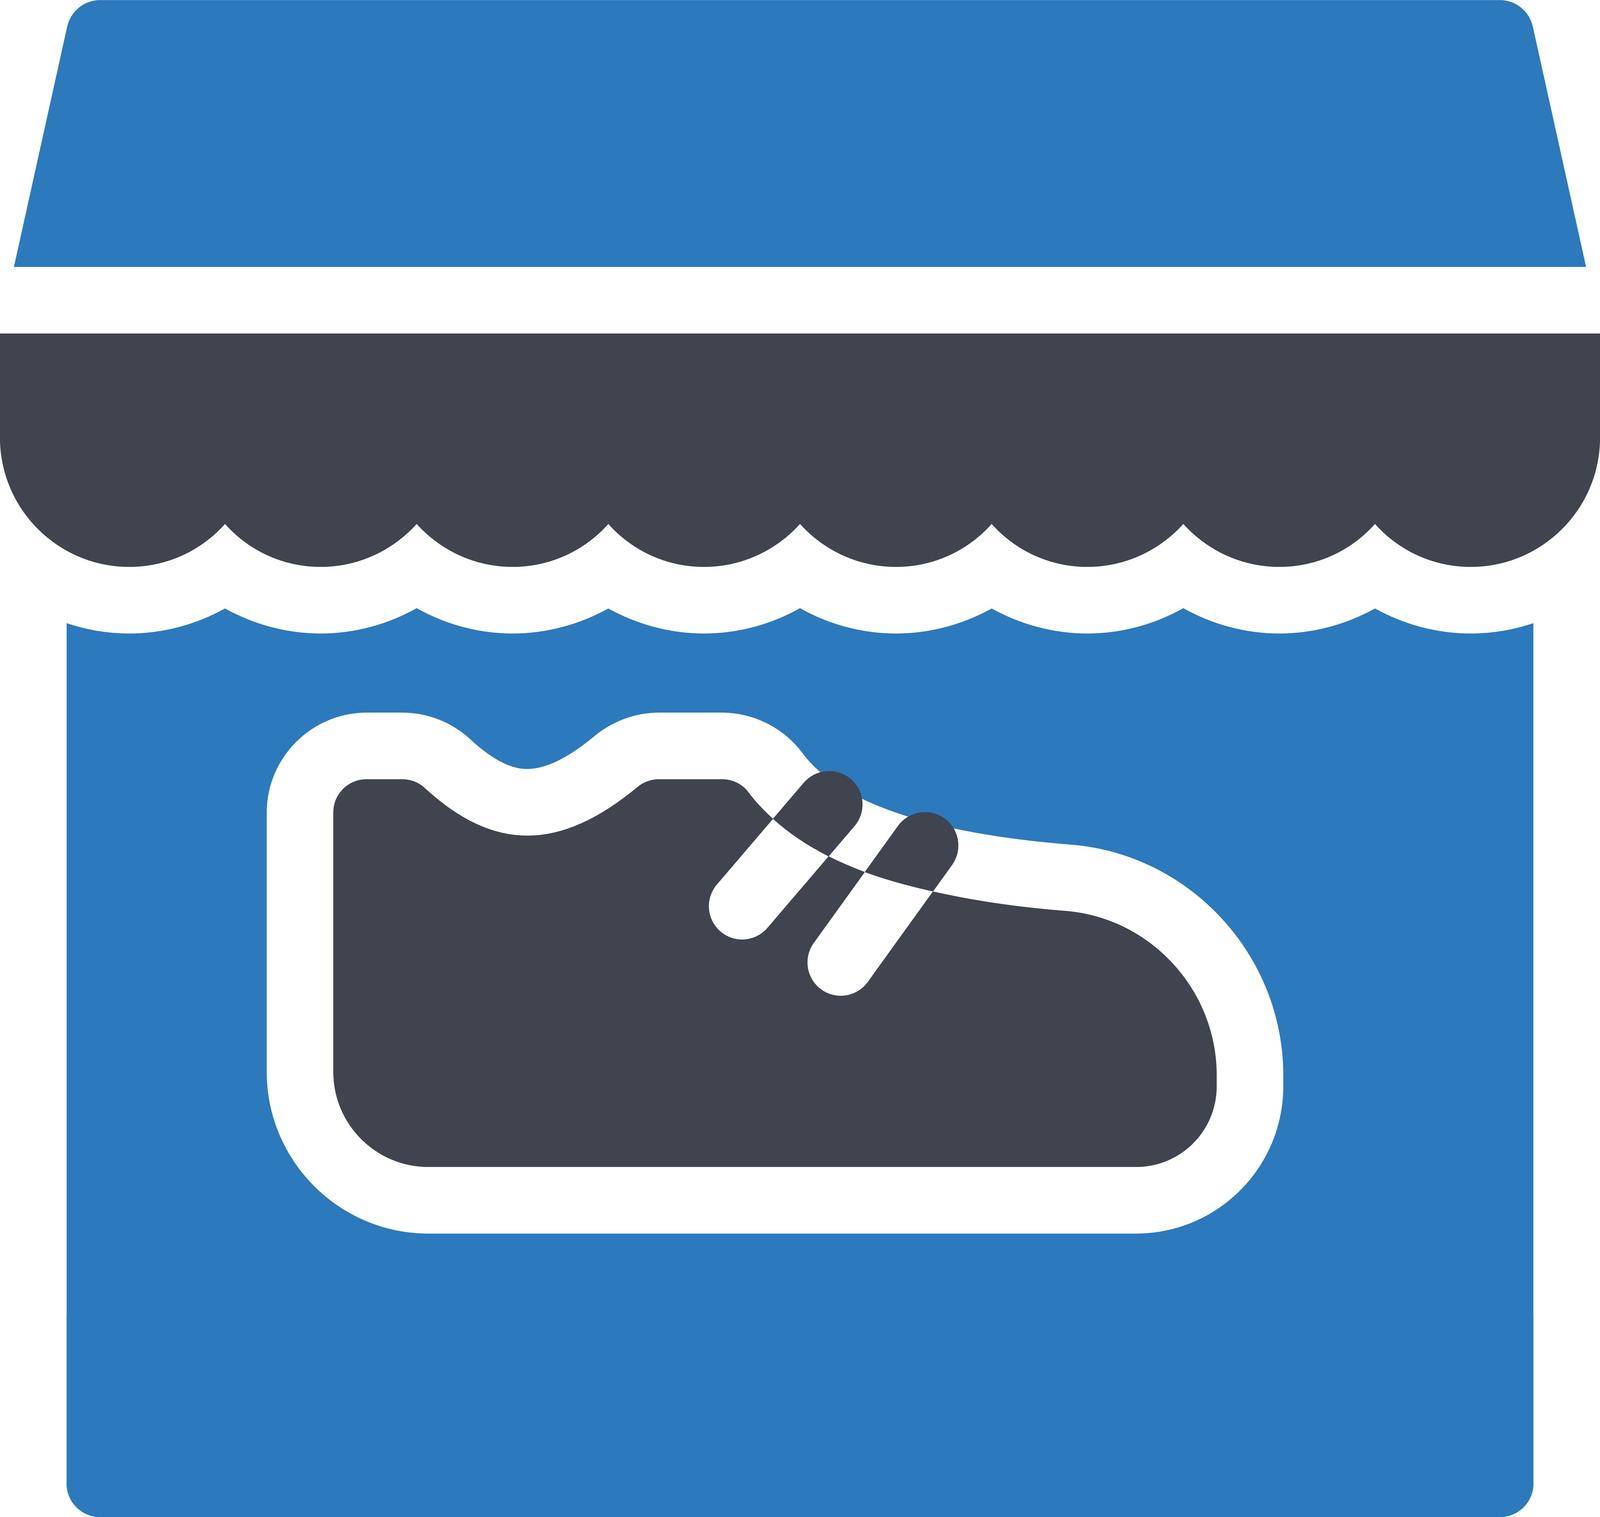 shoes Vector illustration on a transparent background. Premium quality symmbols. Glyphs vector icons for concept and graphic design.